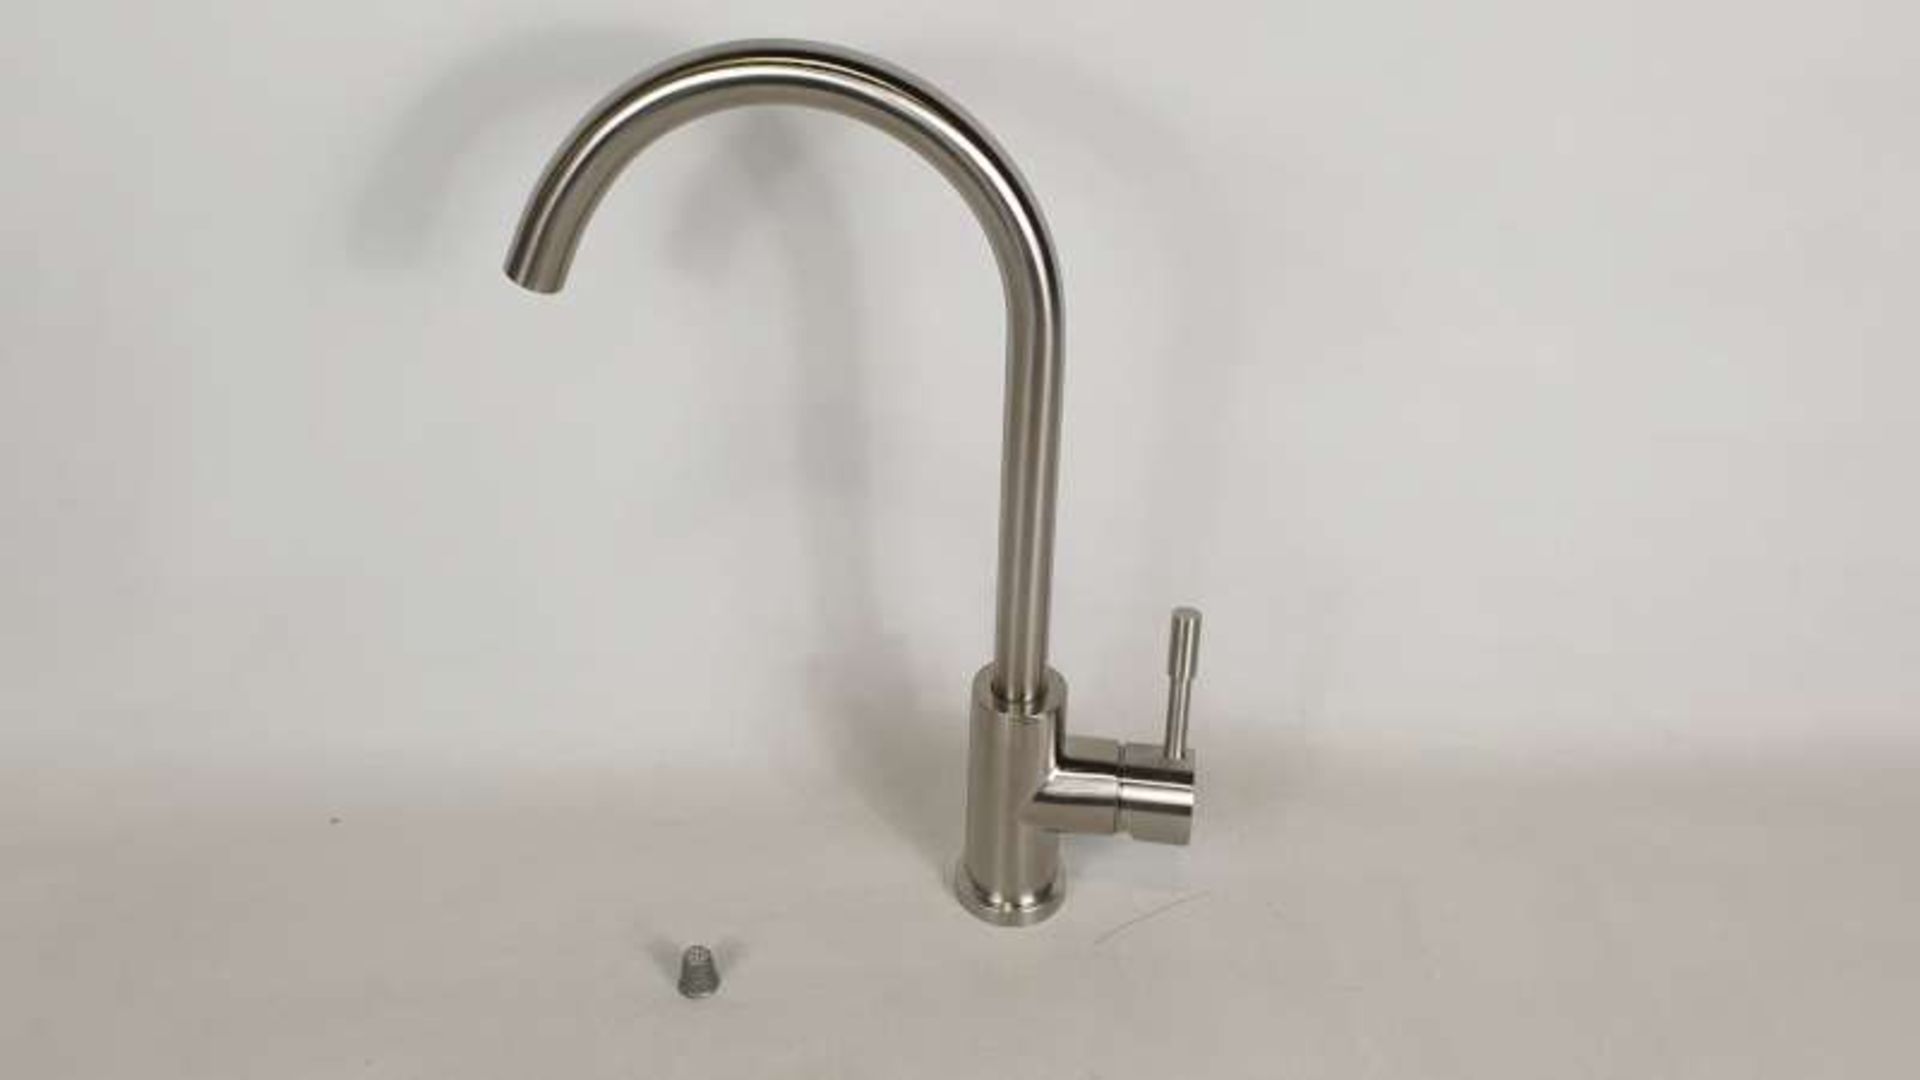 4 X VANGUARD BRUSHED STAINLESS STEEL SINGLE LEVER TAPS - 41CM (TP0753)